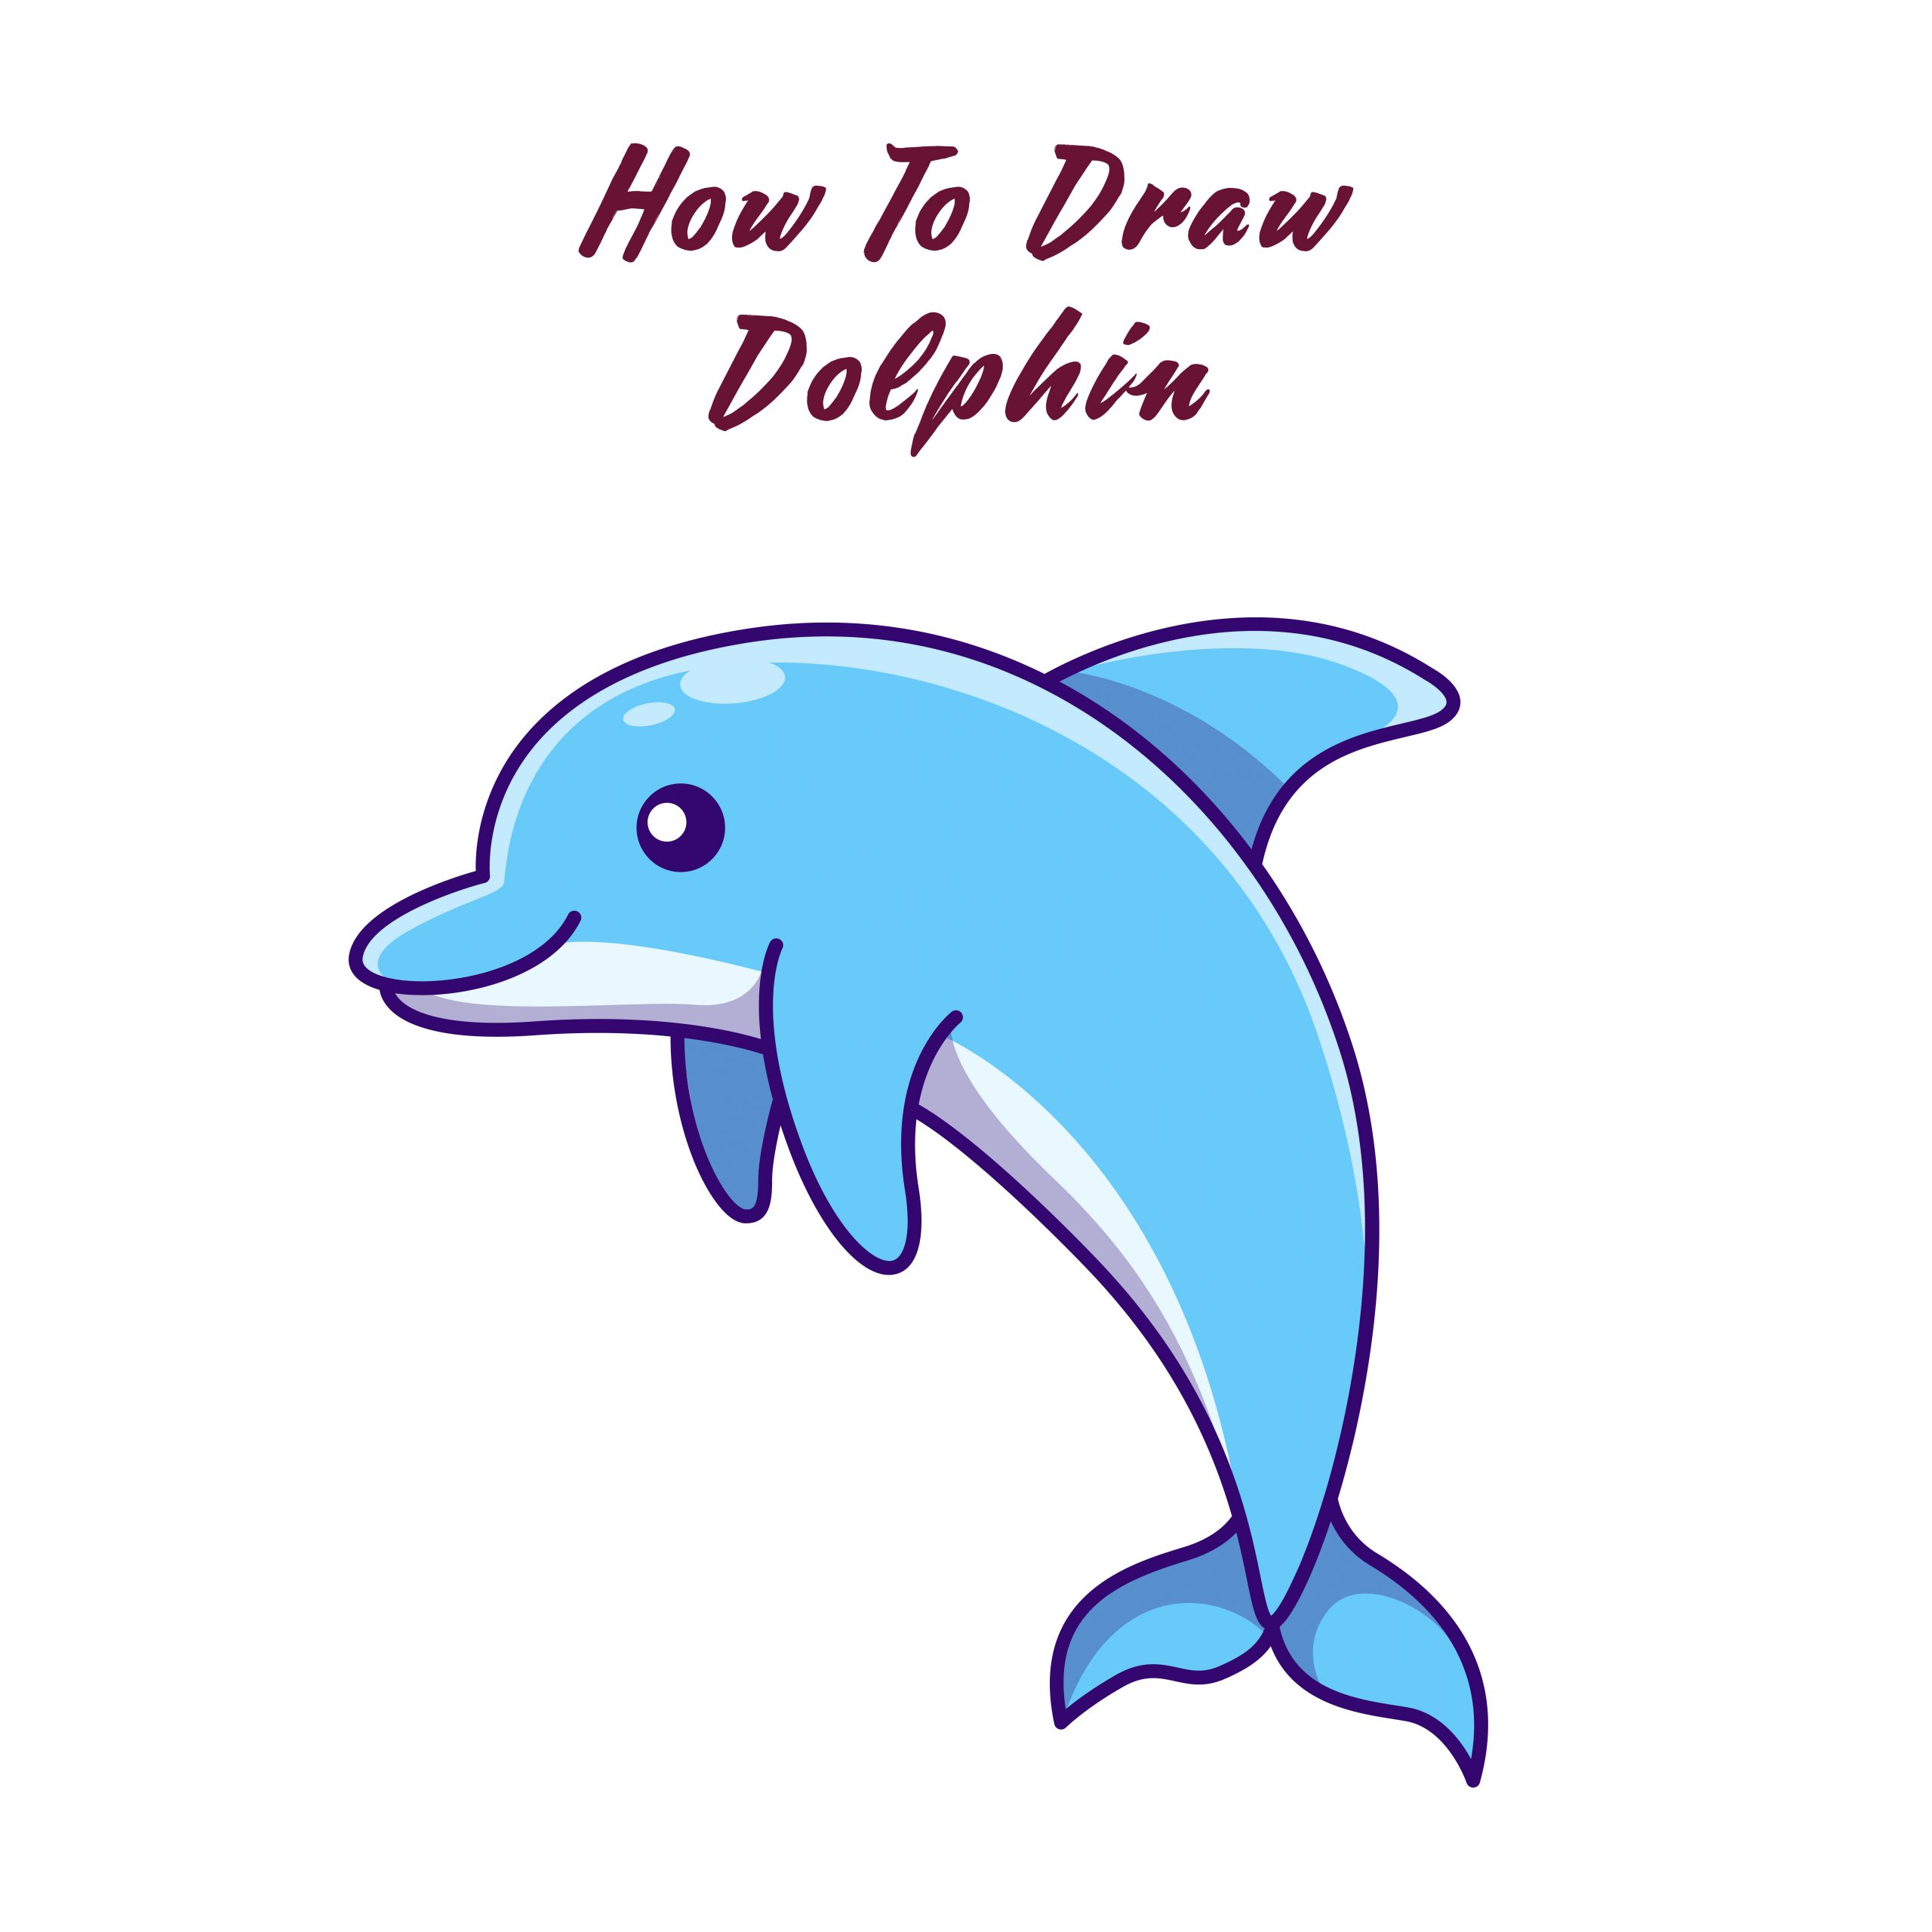 How to Draw A Dolphin Step by Step